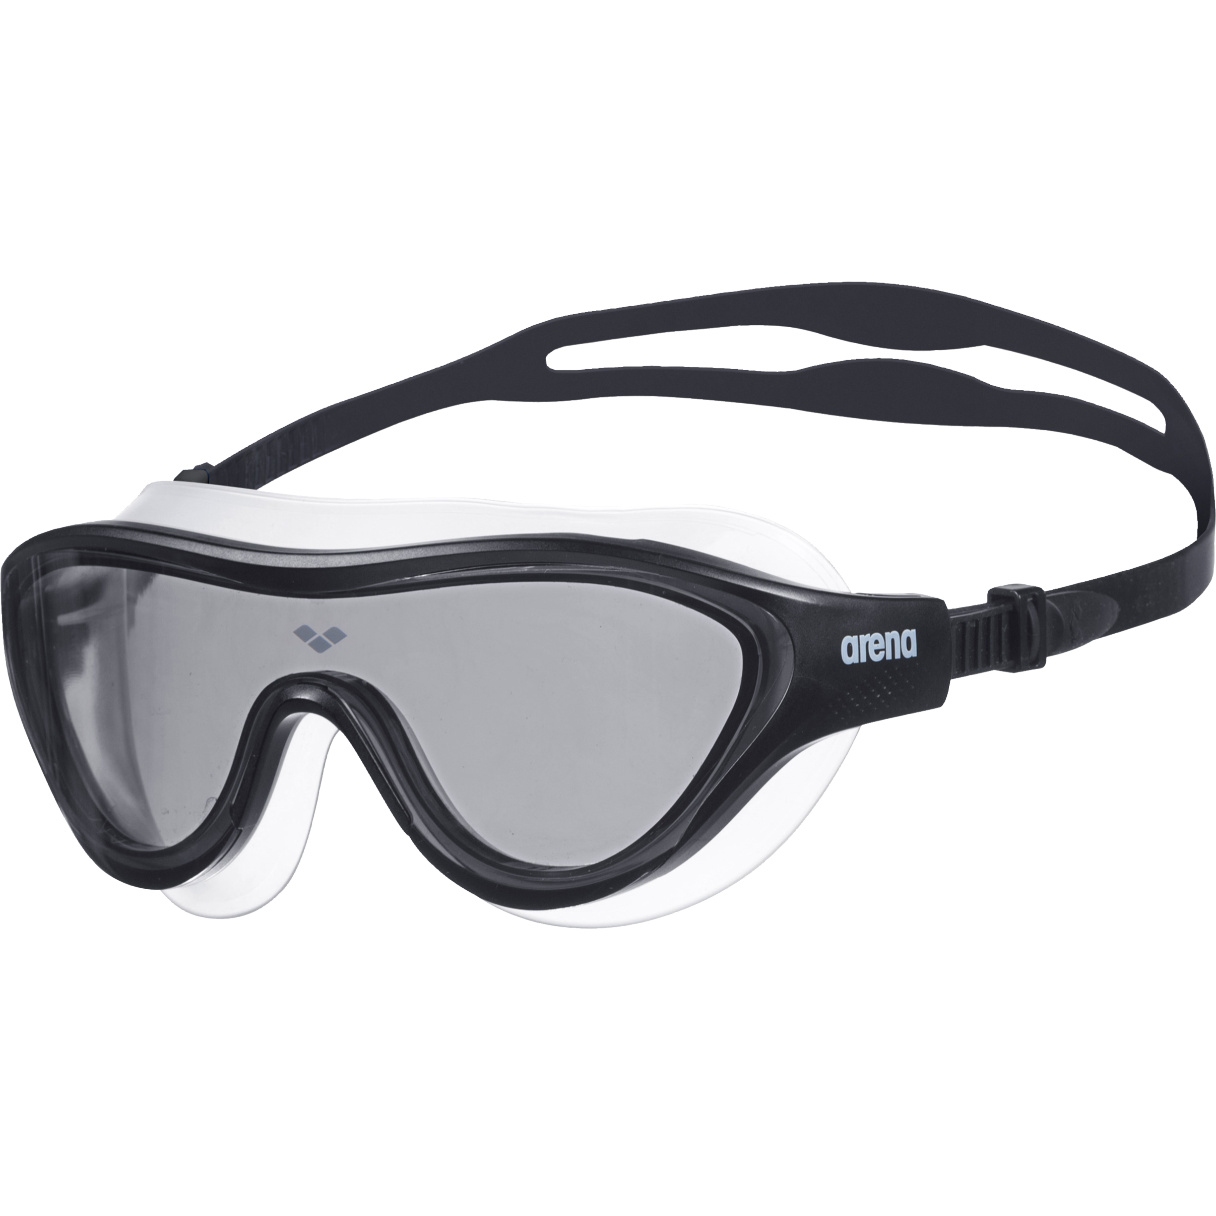 Picture of arena The One Mask Swimming Goggles - Smoke - Black-Black